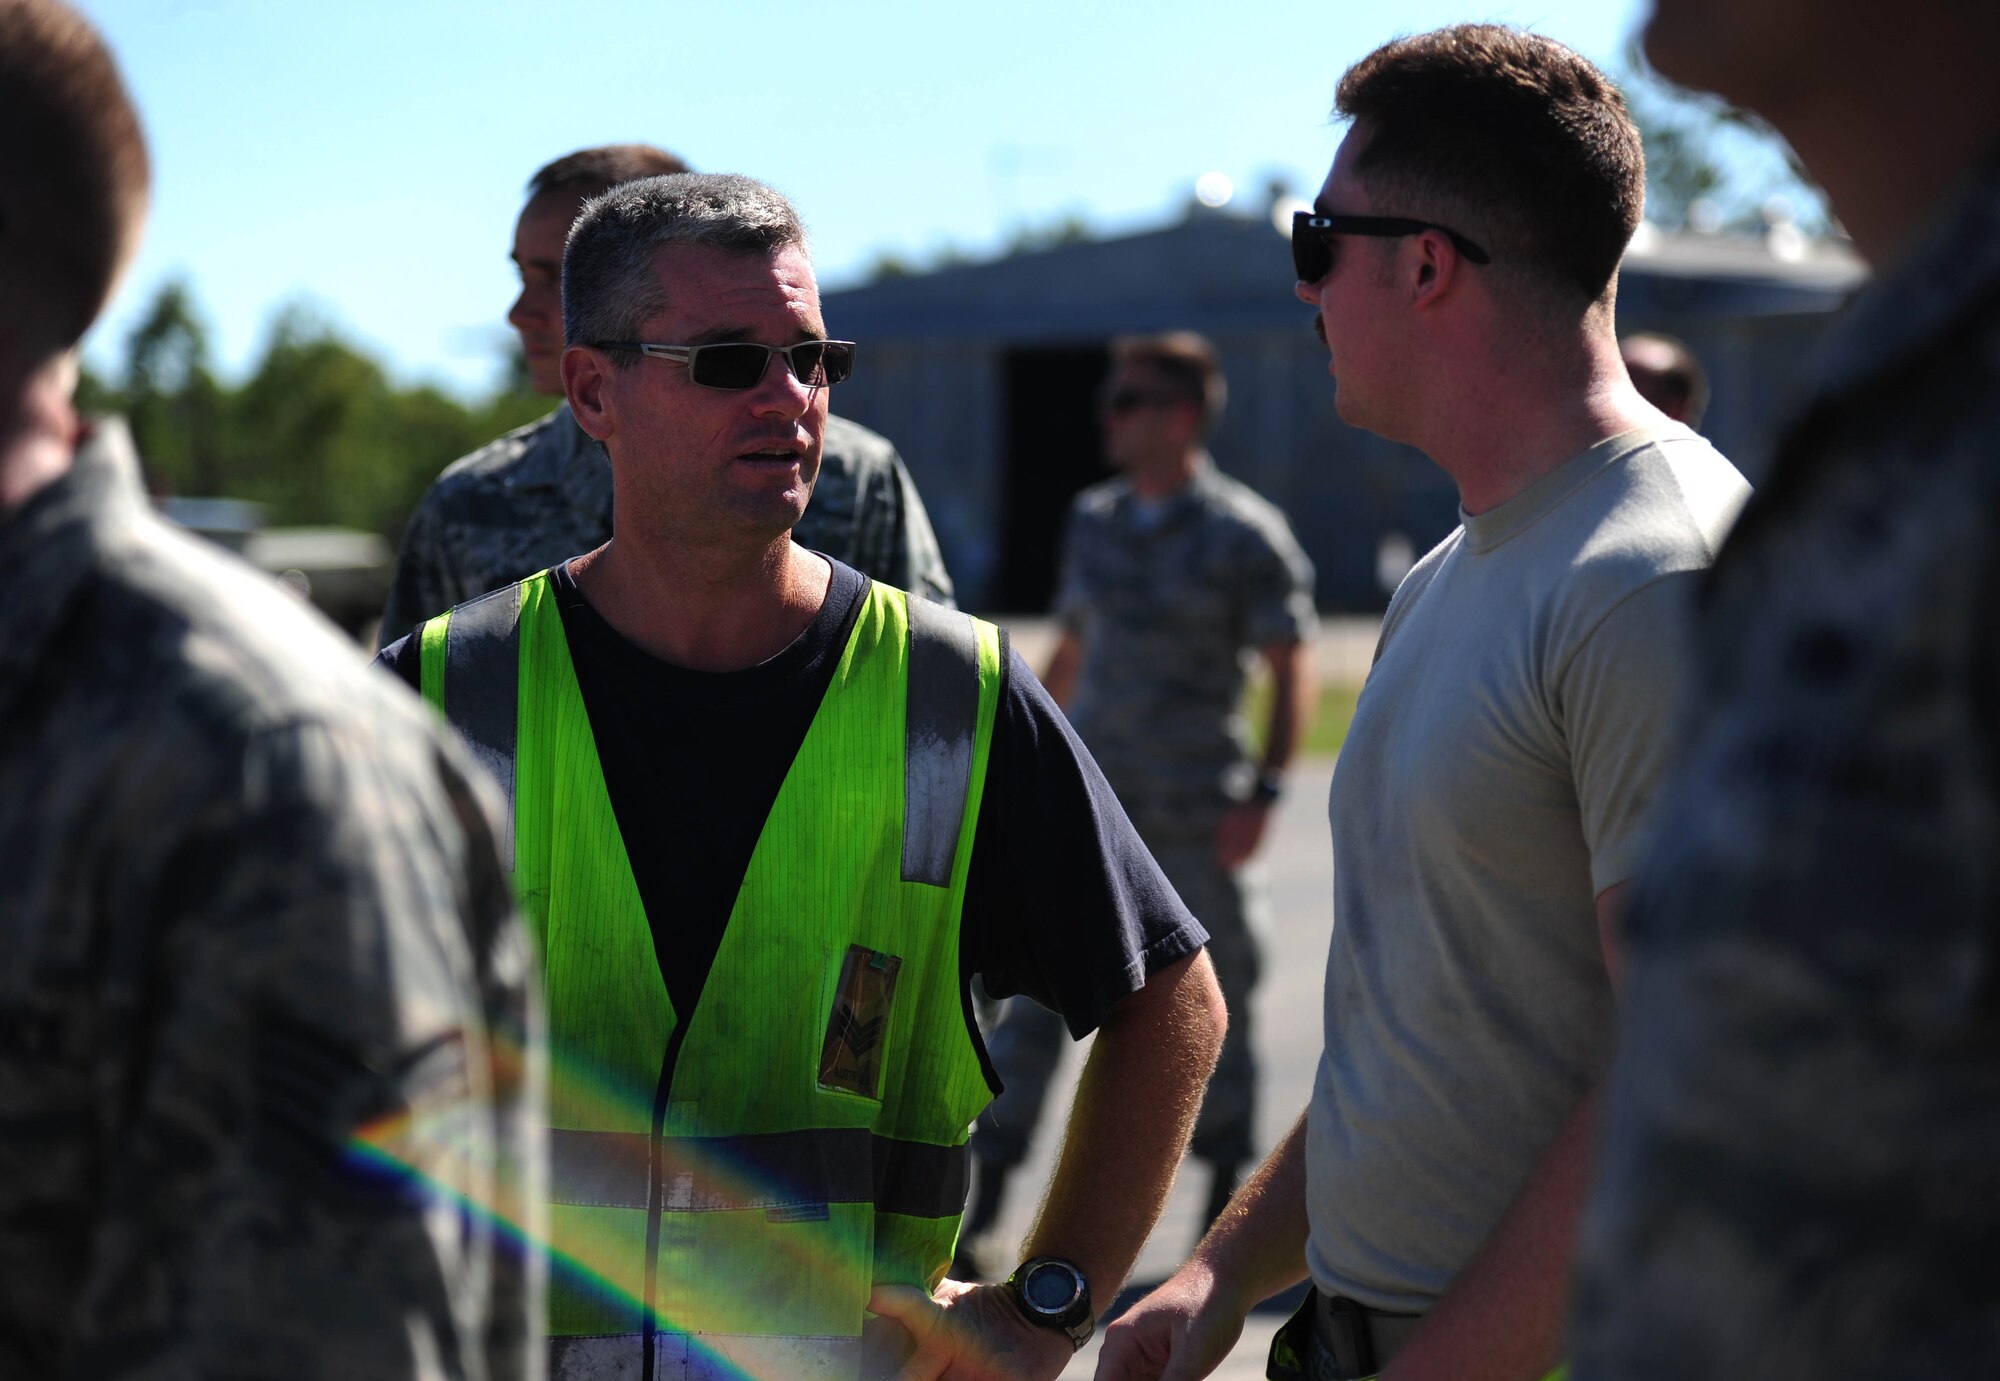 U.S. Air Force Airmen from Whiteman Air Force Base, Missouri, and the Royal Australian Air Force perform a foreign object and debris walk at RAAF Base Tindal, Australia, March 22, 2016. The FOD walk was conducted during a training mission where a B-2 Spirit conducted an engine running crew change at the base. The B-2 was one of three that were deployed to the Indo-Asia-Pacific region from March 8 through 29 to enhance bomber crew readiness and proficiency and to integrate capabilities with key regional partners. U.S. Strategic Command bombers regularly rotate through the Indo-Asia-Pacific region to conduct theater security cooperation engagements with U.S. allies and partners and demonstrate a shared commitment to promoting security and stability in the region. (U.S. Air Force photo by Senior Airman Joel Pfiester/Released)